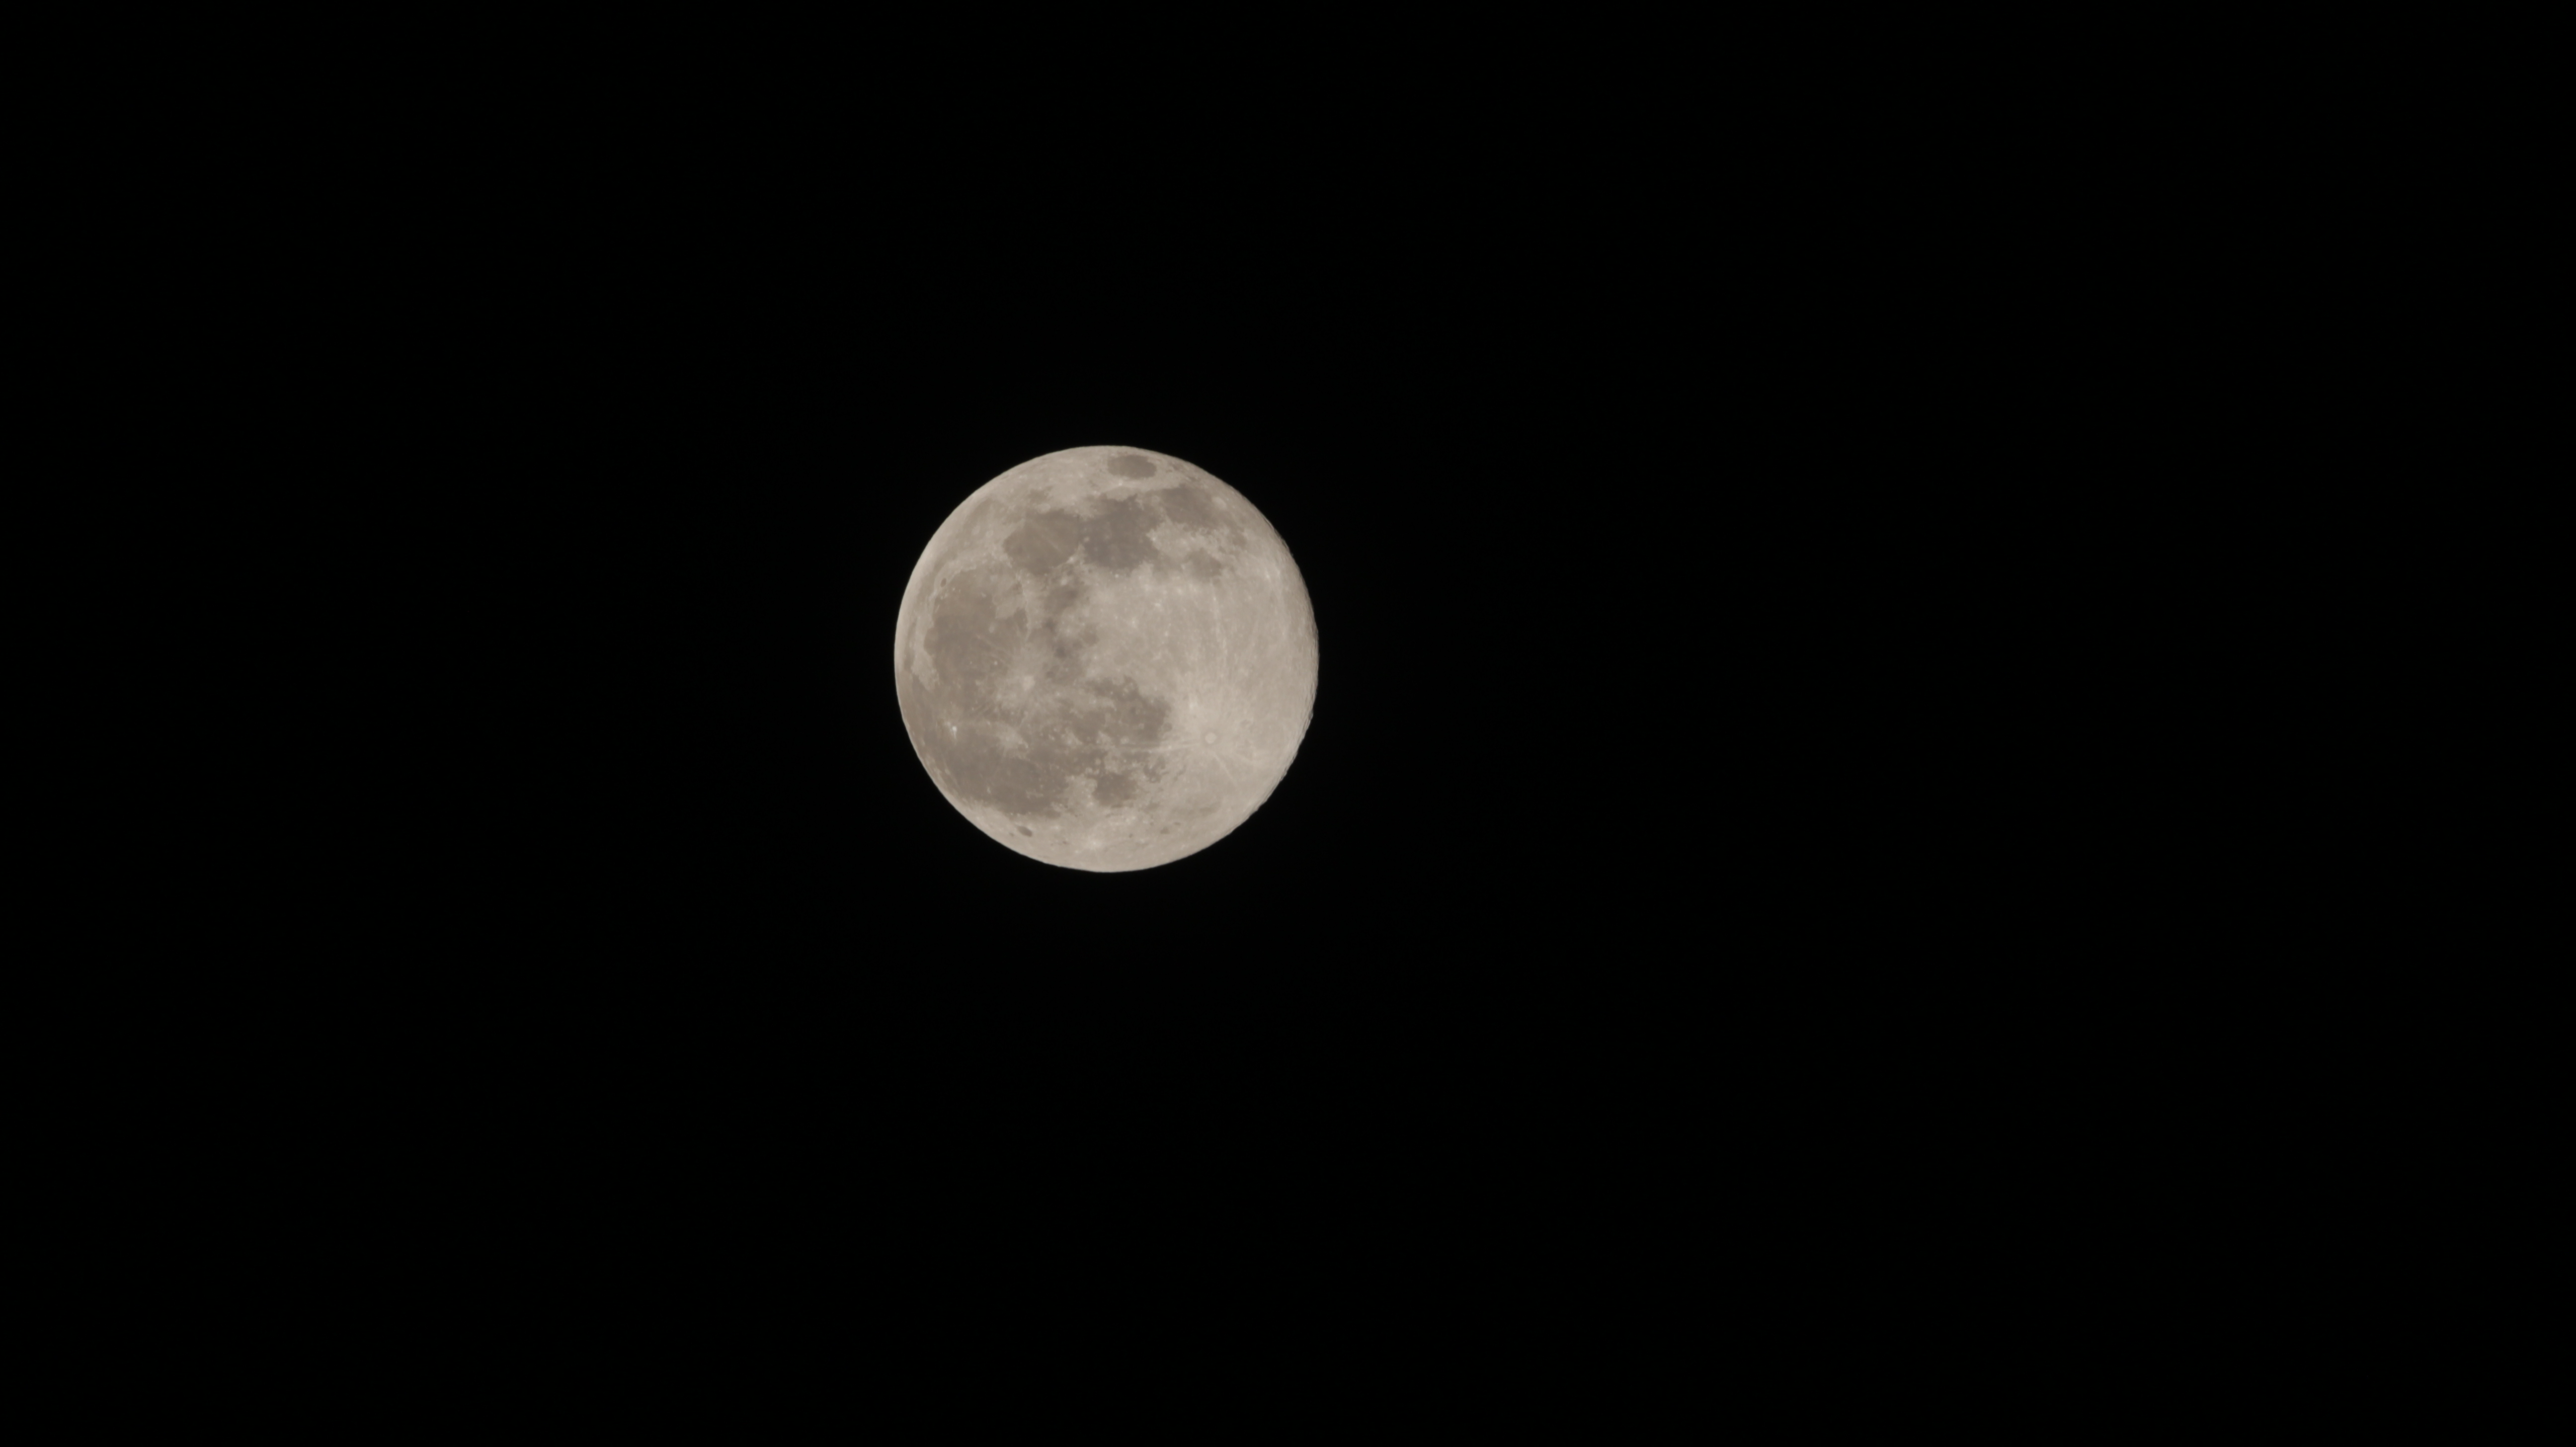 Another Moon Shot